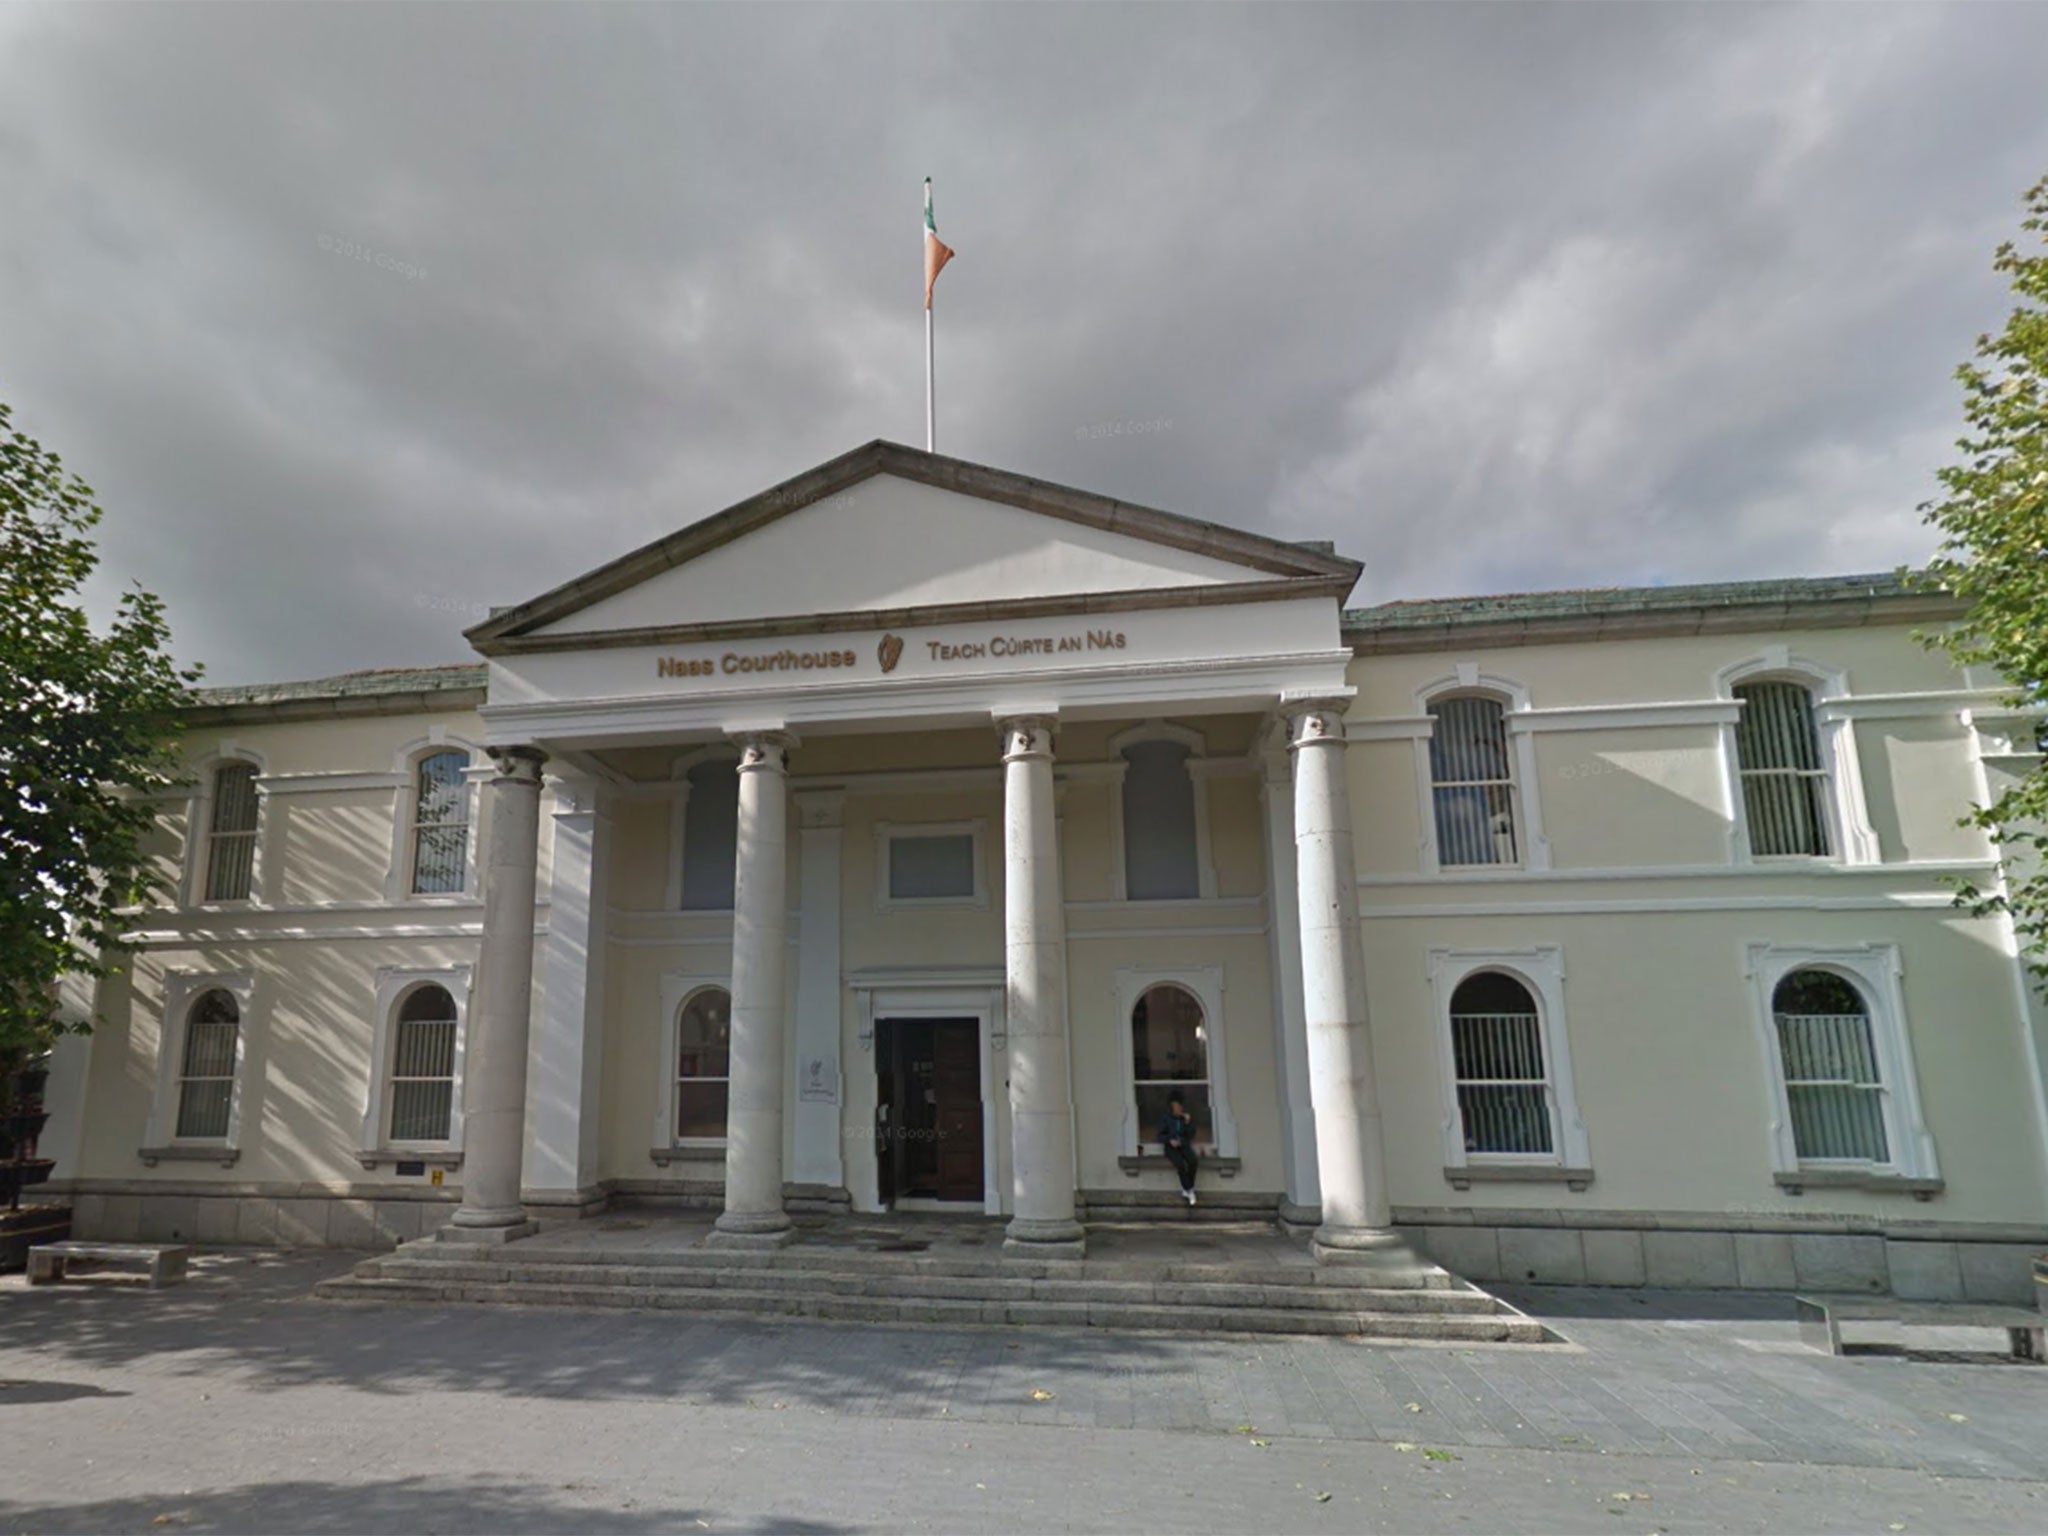 Naas Courthouse, where the comments were made